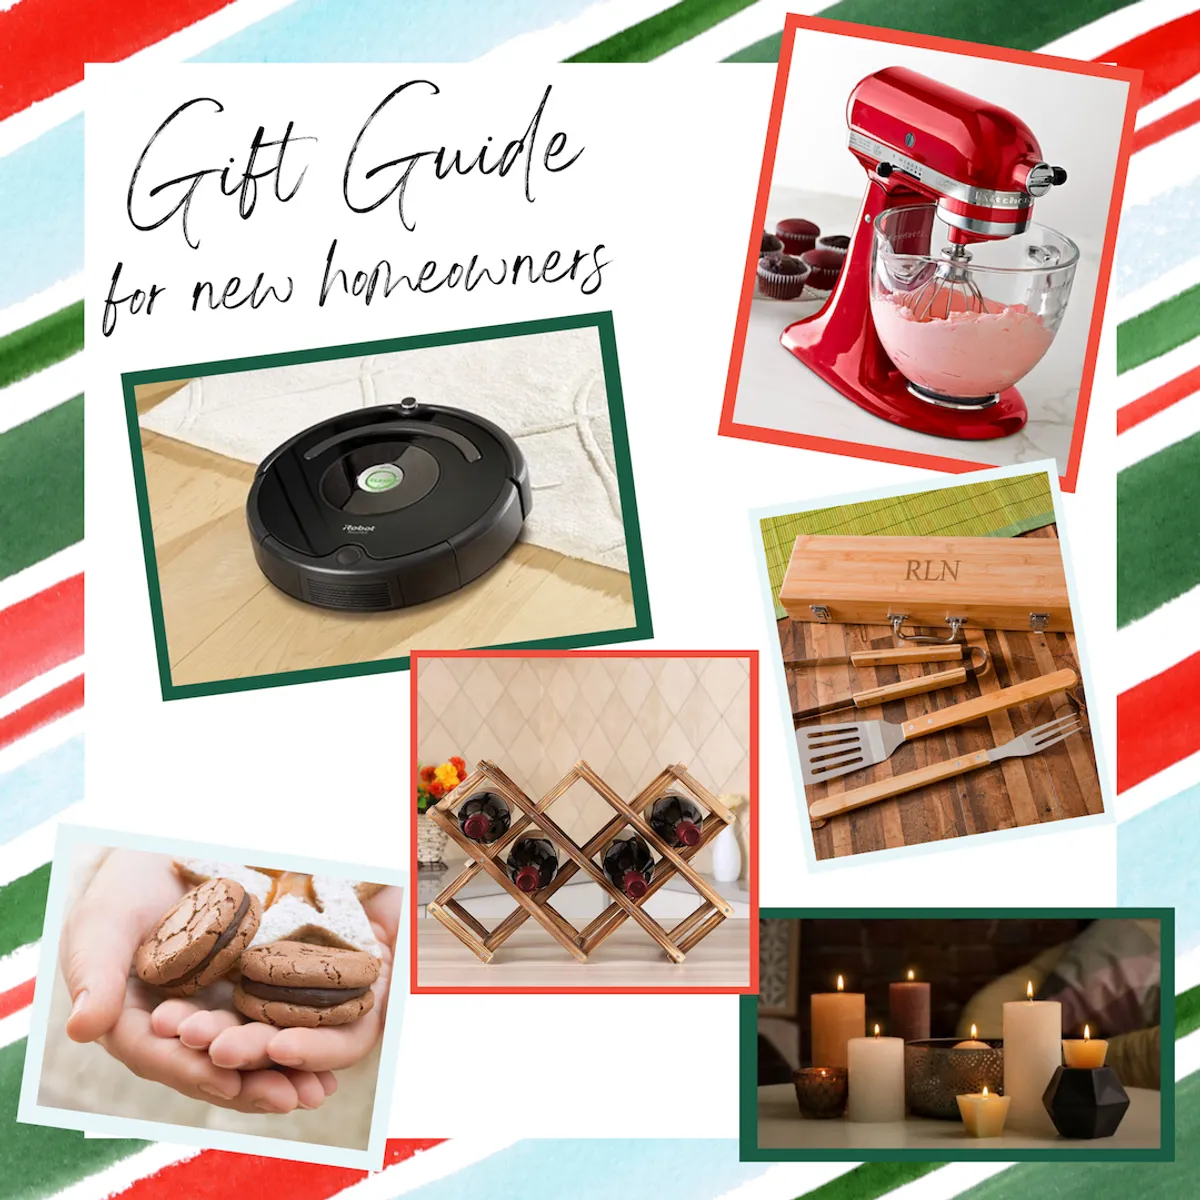 American Legend Homes gift guide for the new homeowner this holiday season